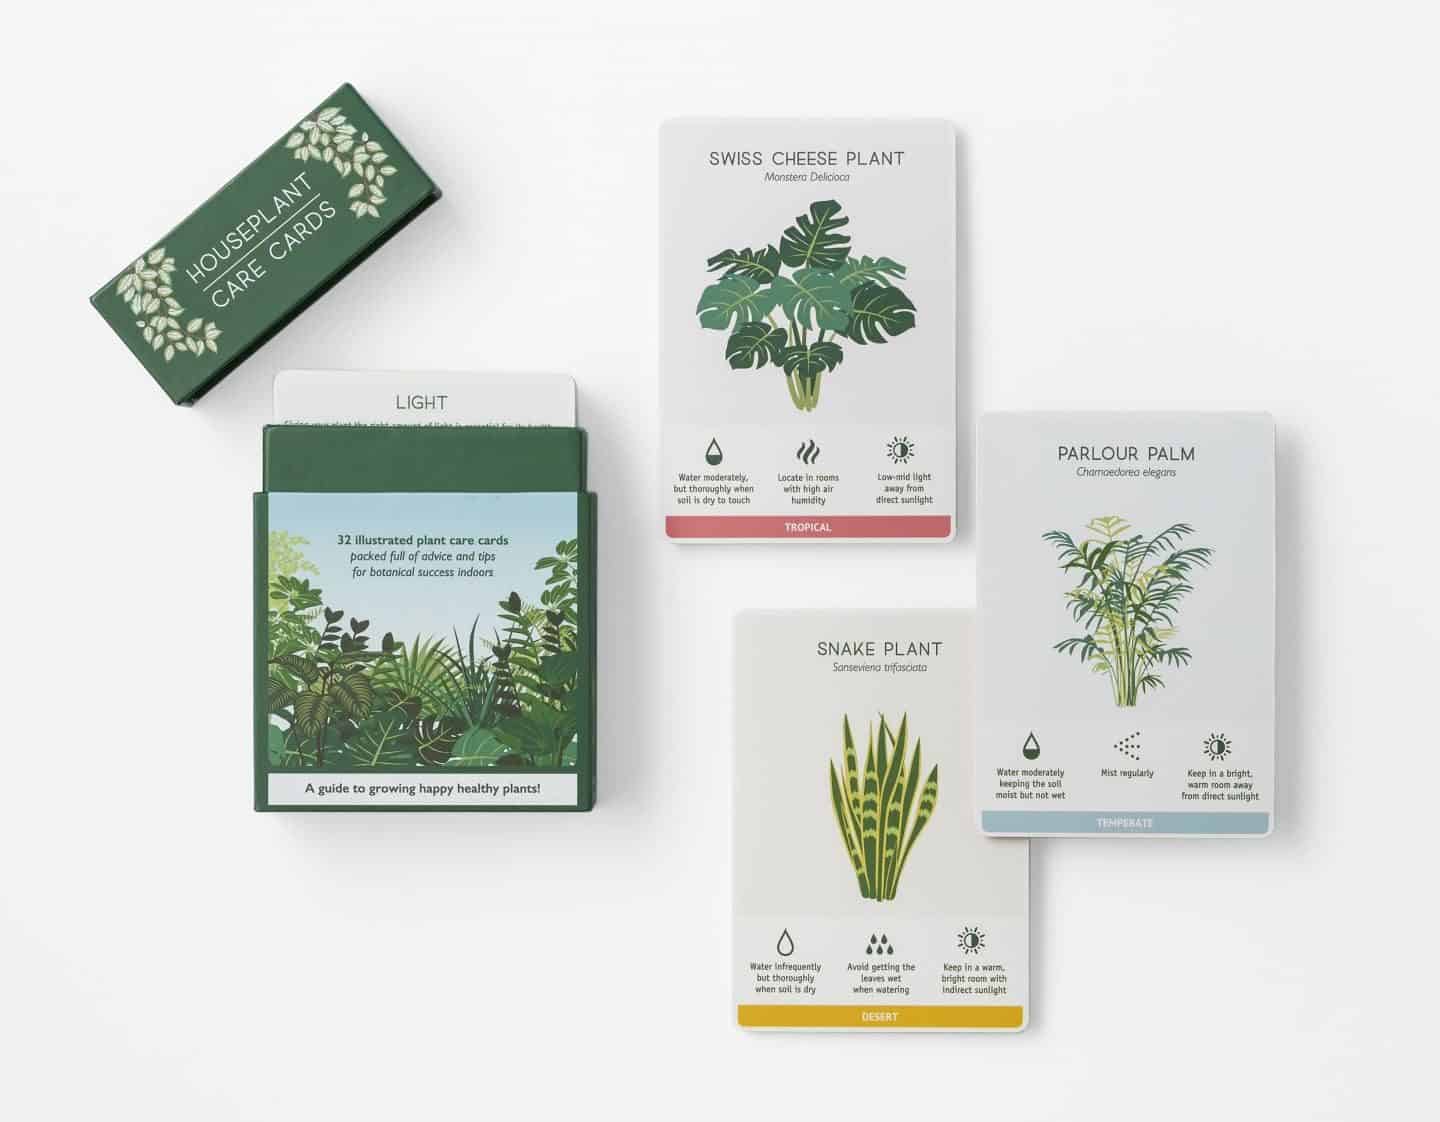 Gifts for plant lovers - these plant care cards from another studio offer tips and advice for caring for your plants